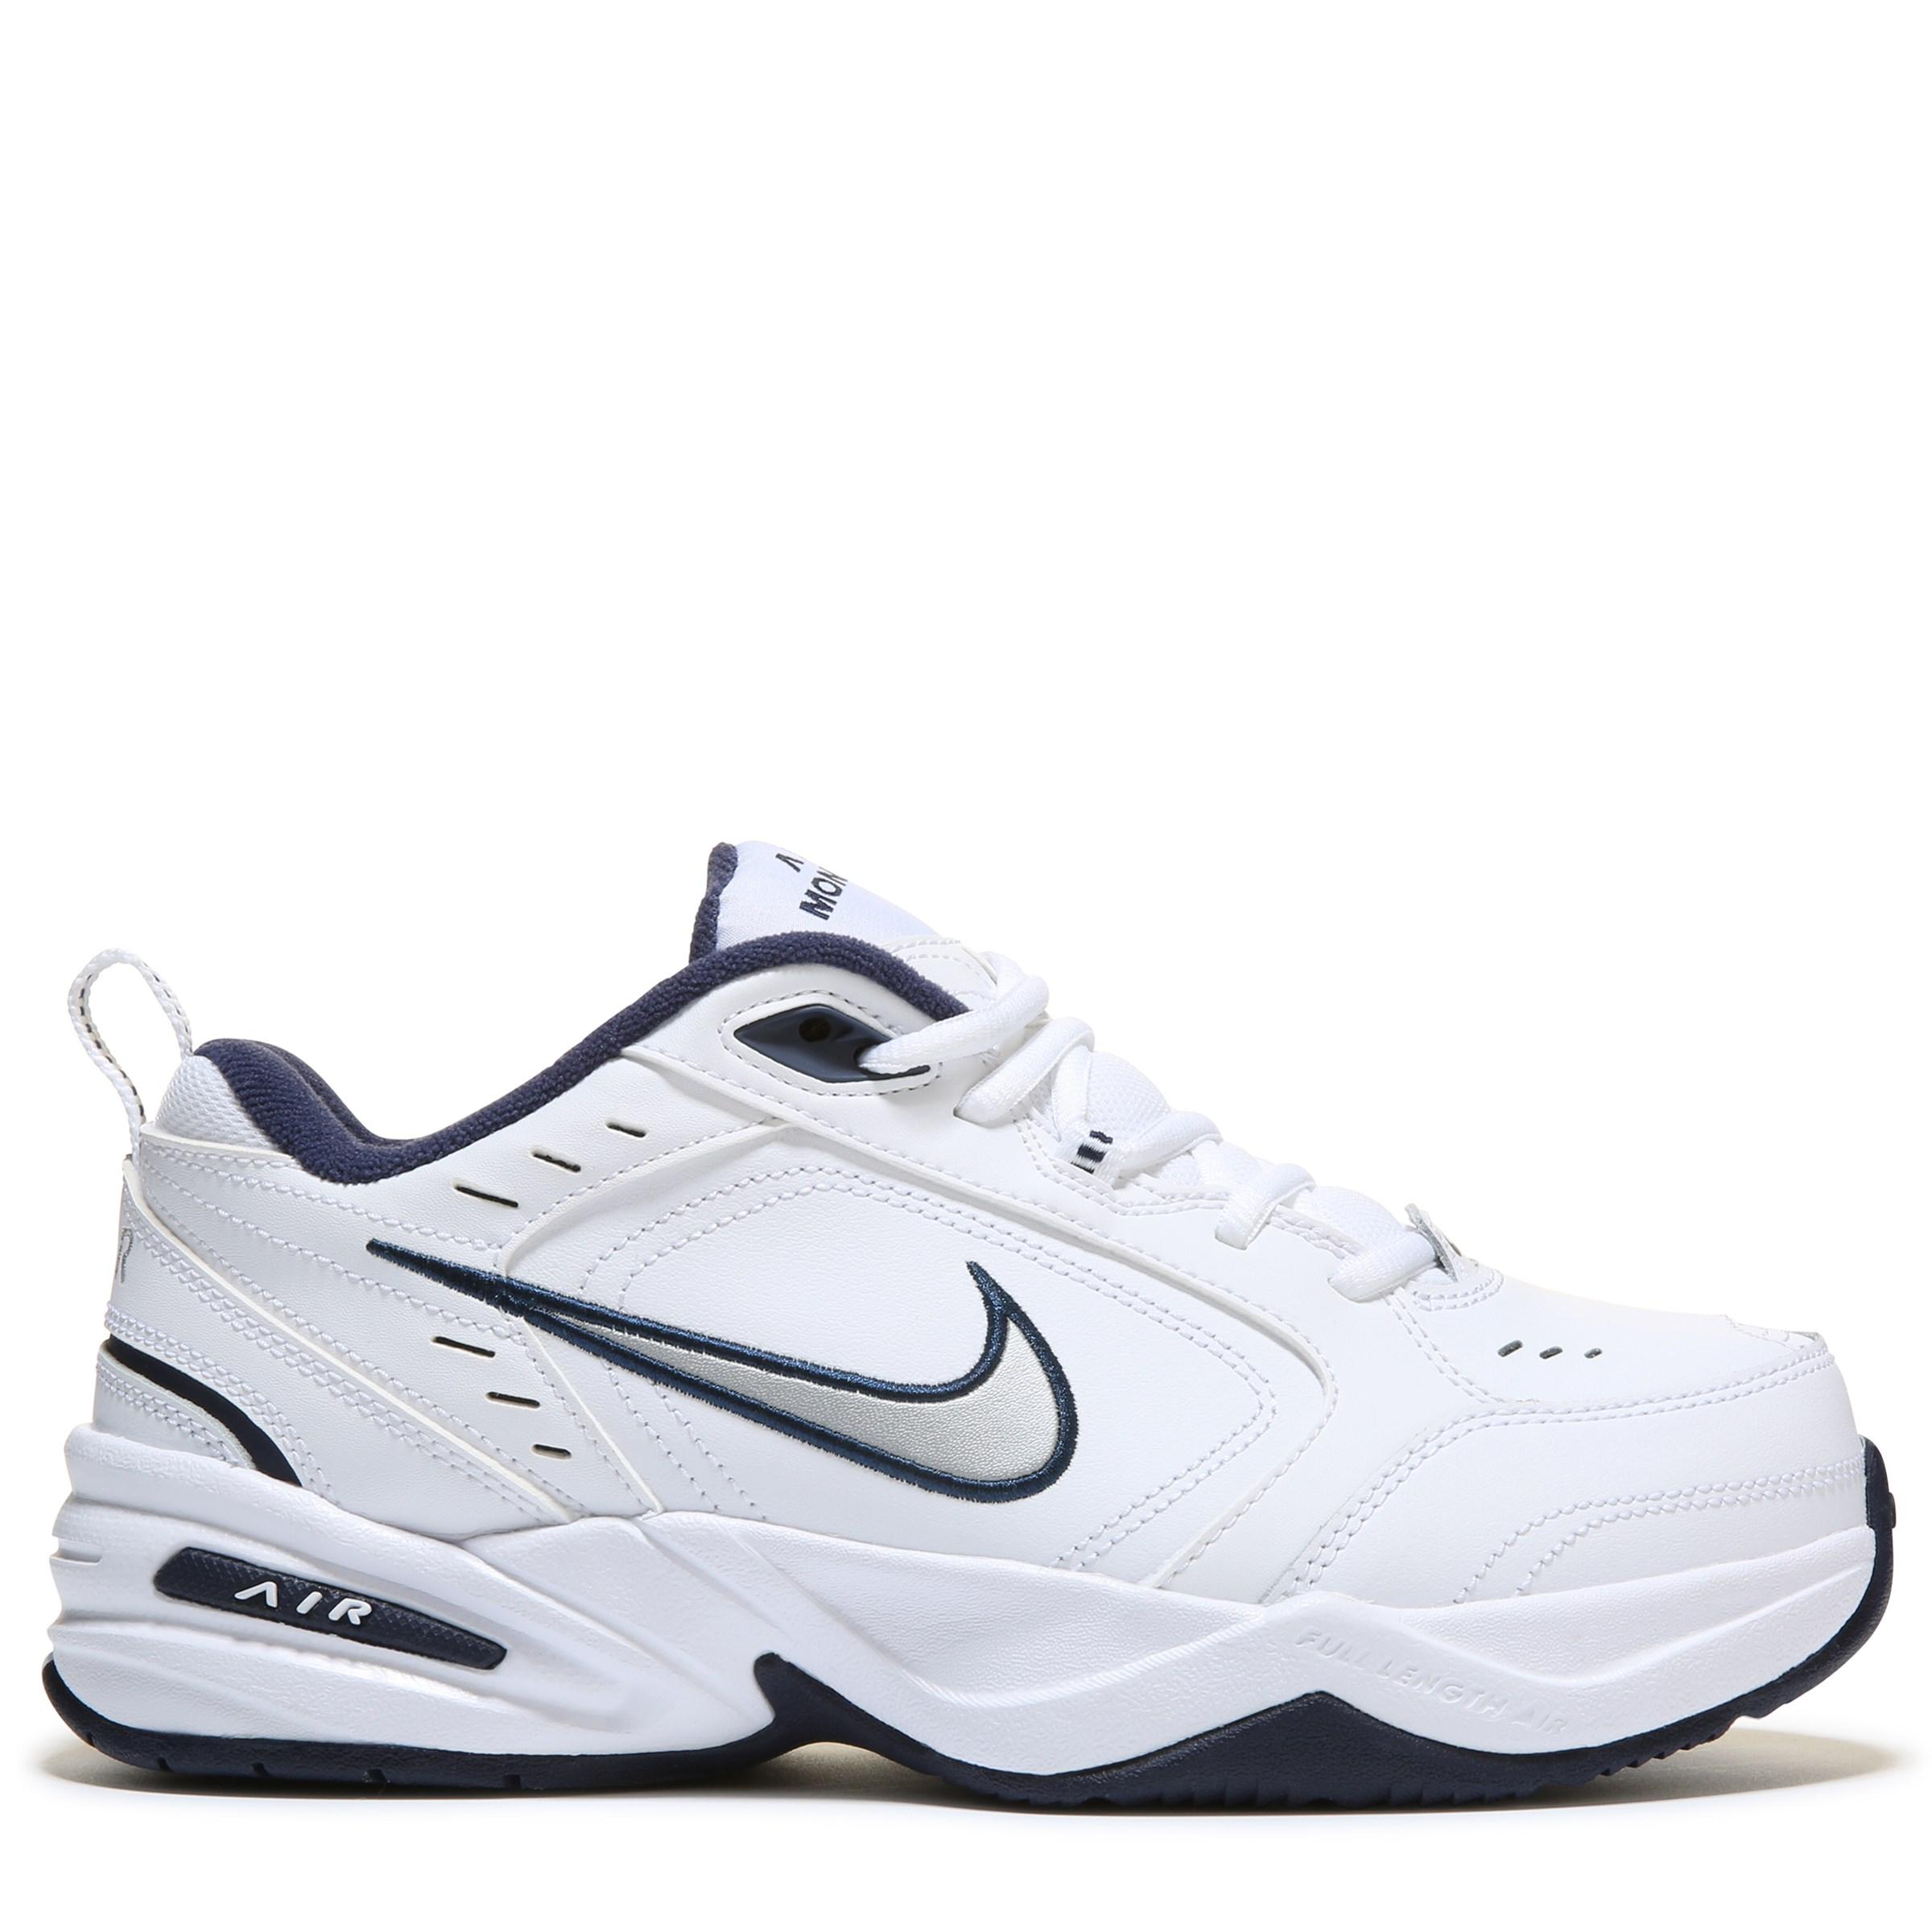 Nike Leather Air Monarch Iv Gymnastics Shoes in White/ Silver/ Navy ...